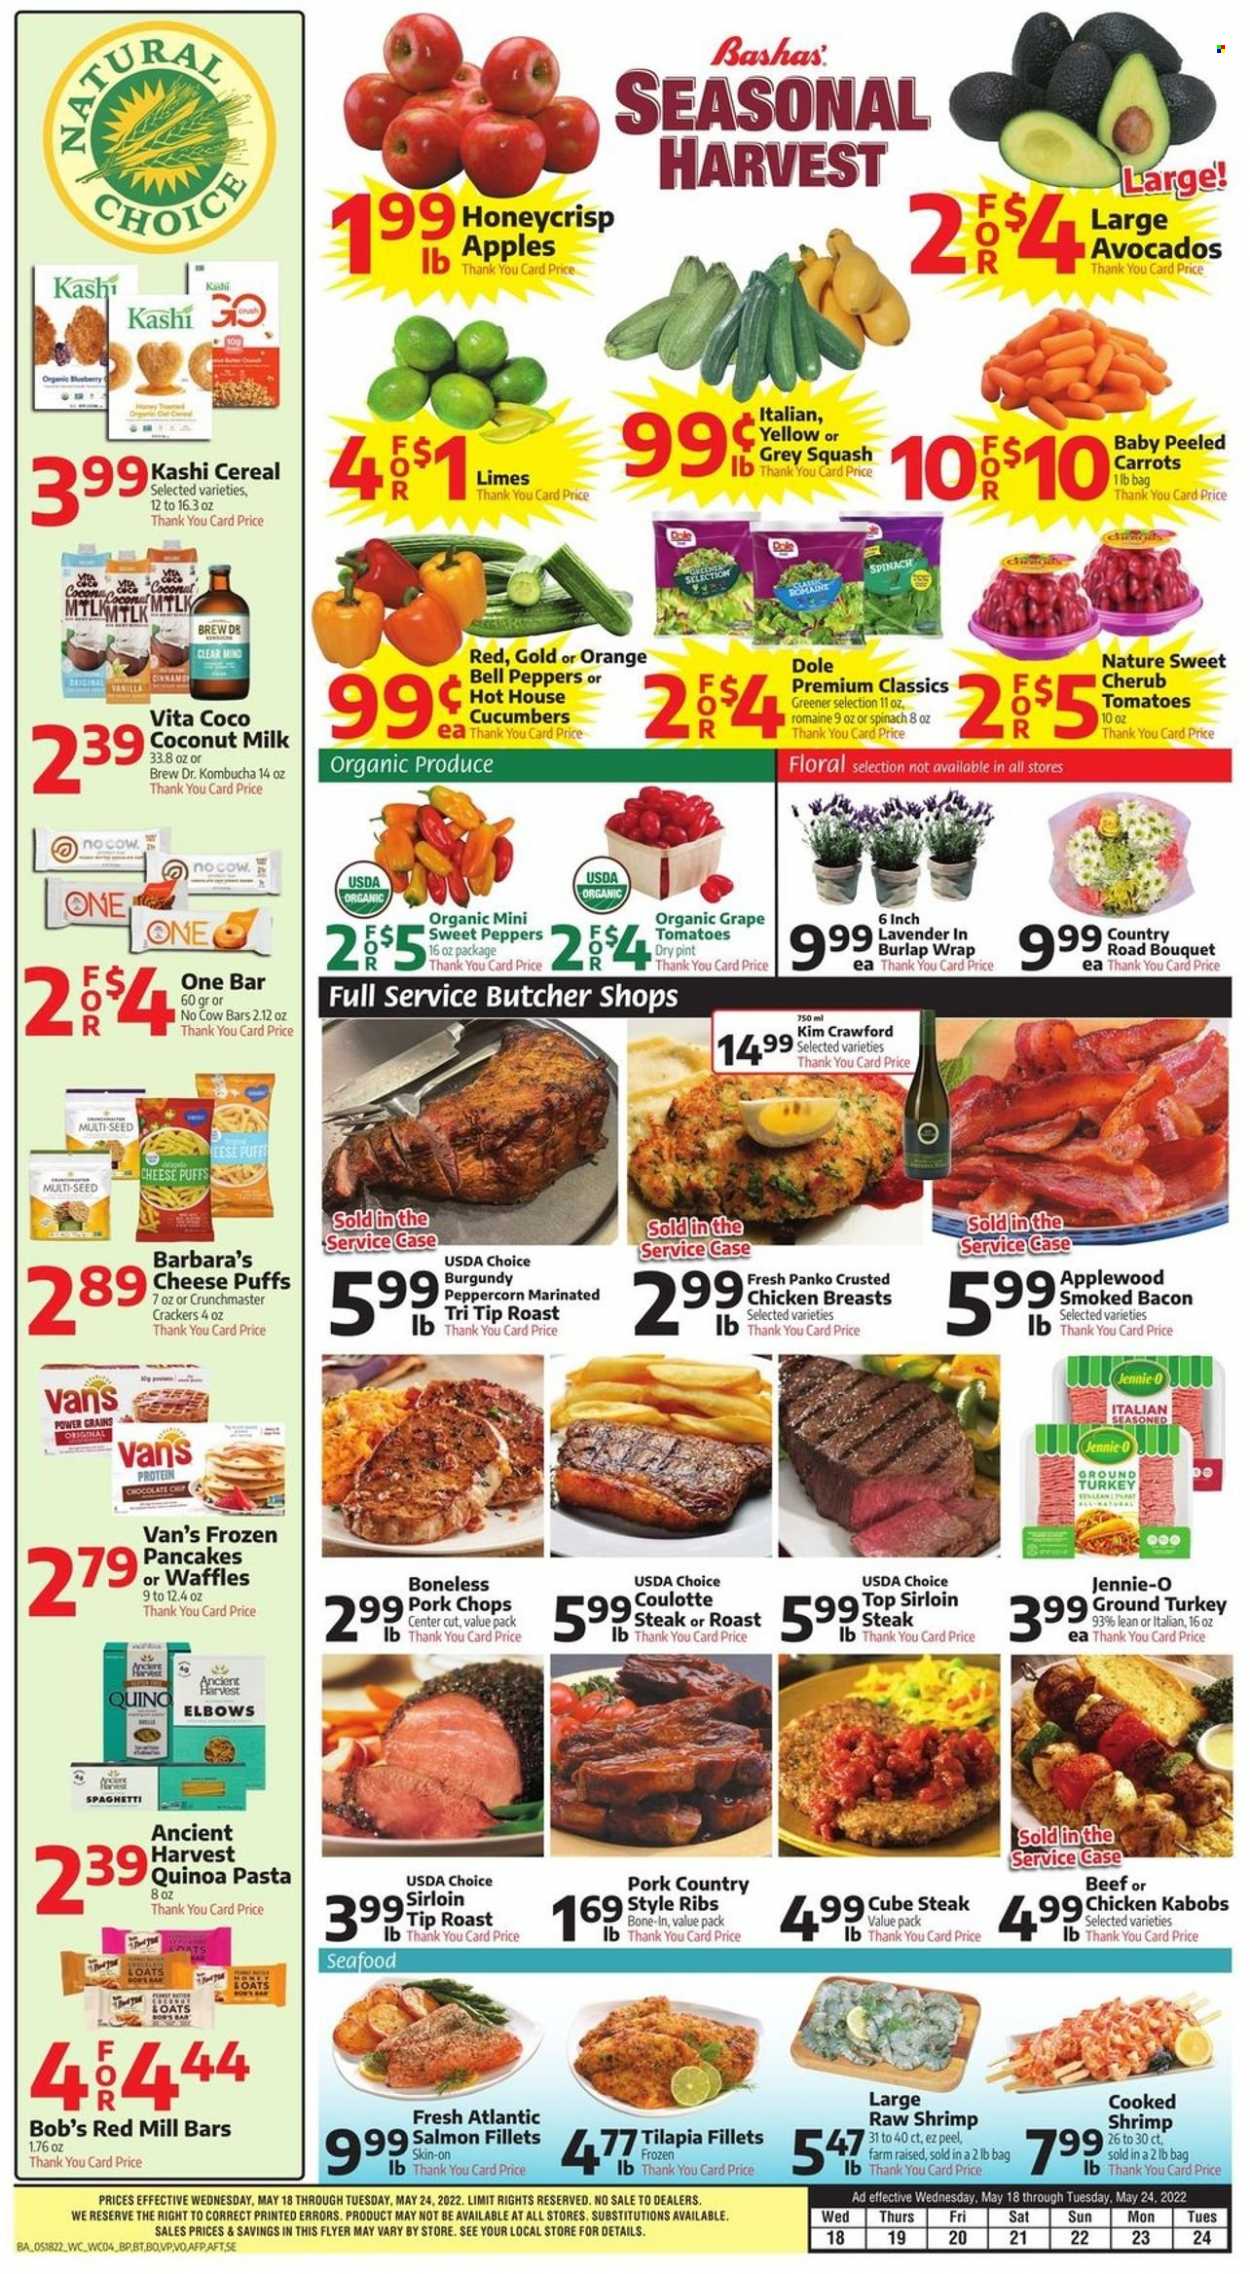 thumbnail - Bashas' Flyer - 05/18/2022 - 05/24/2022 - Sales products - puffs, waffles, panko breadcrumbs, bell peppers, carrots, cucumber, spinach, sweet peppers, tomatoes, Dole, peppers, apples, avocado, limes, oranges, salmon, salmon fillet, tilapia, seafood, shrimps, spaghetti, pasta, bacon, chocolate, crackers, coconut milk, cereals, quinoa, kombucha, ground turkey, chicken breasts, beef sirloin, steak, sirloin steak, pork chops, pork meat, pork ribs, country style ribs, plant seeds, bouquet. Page 4.